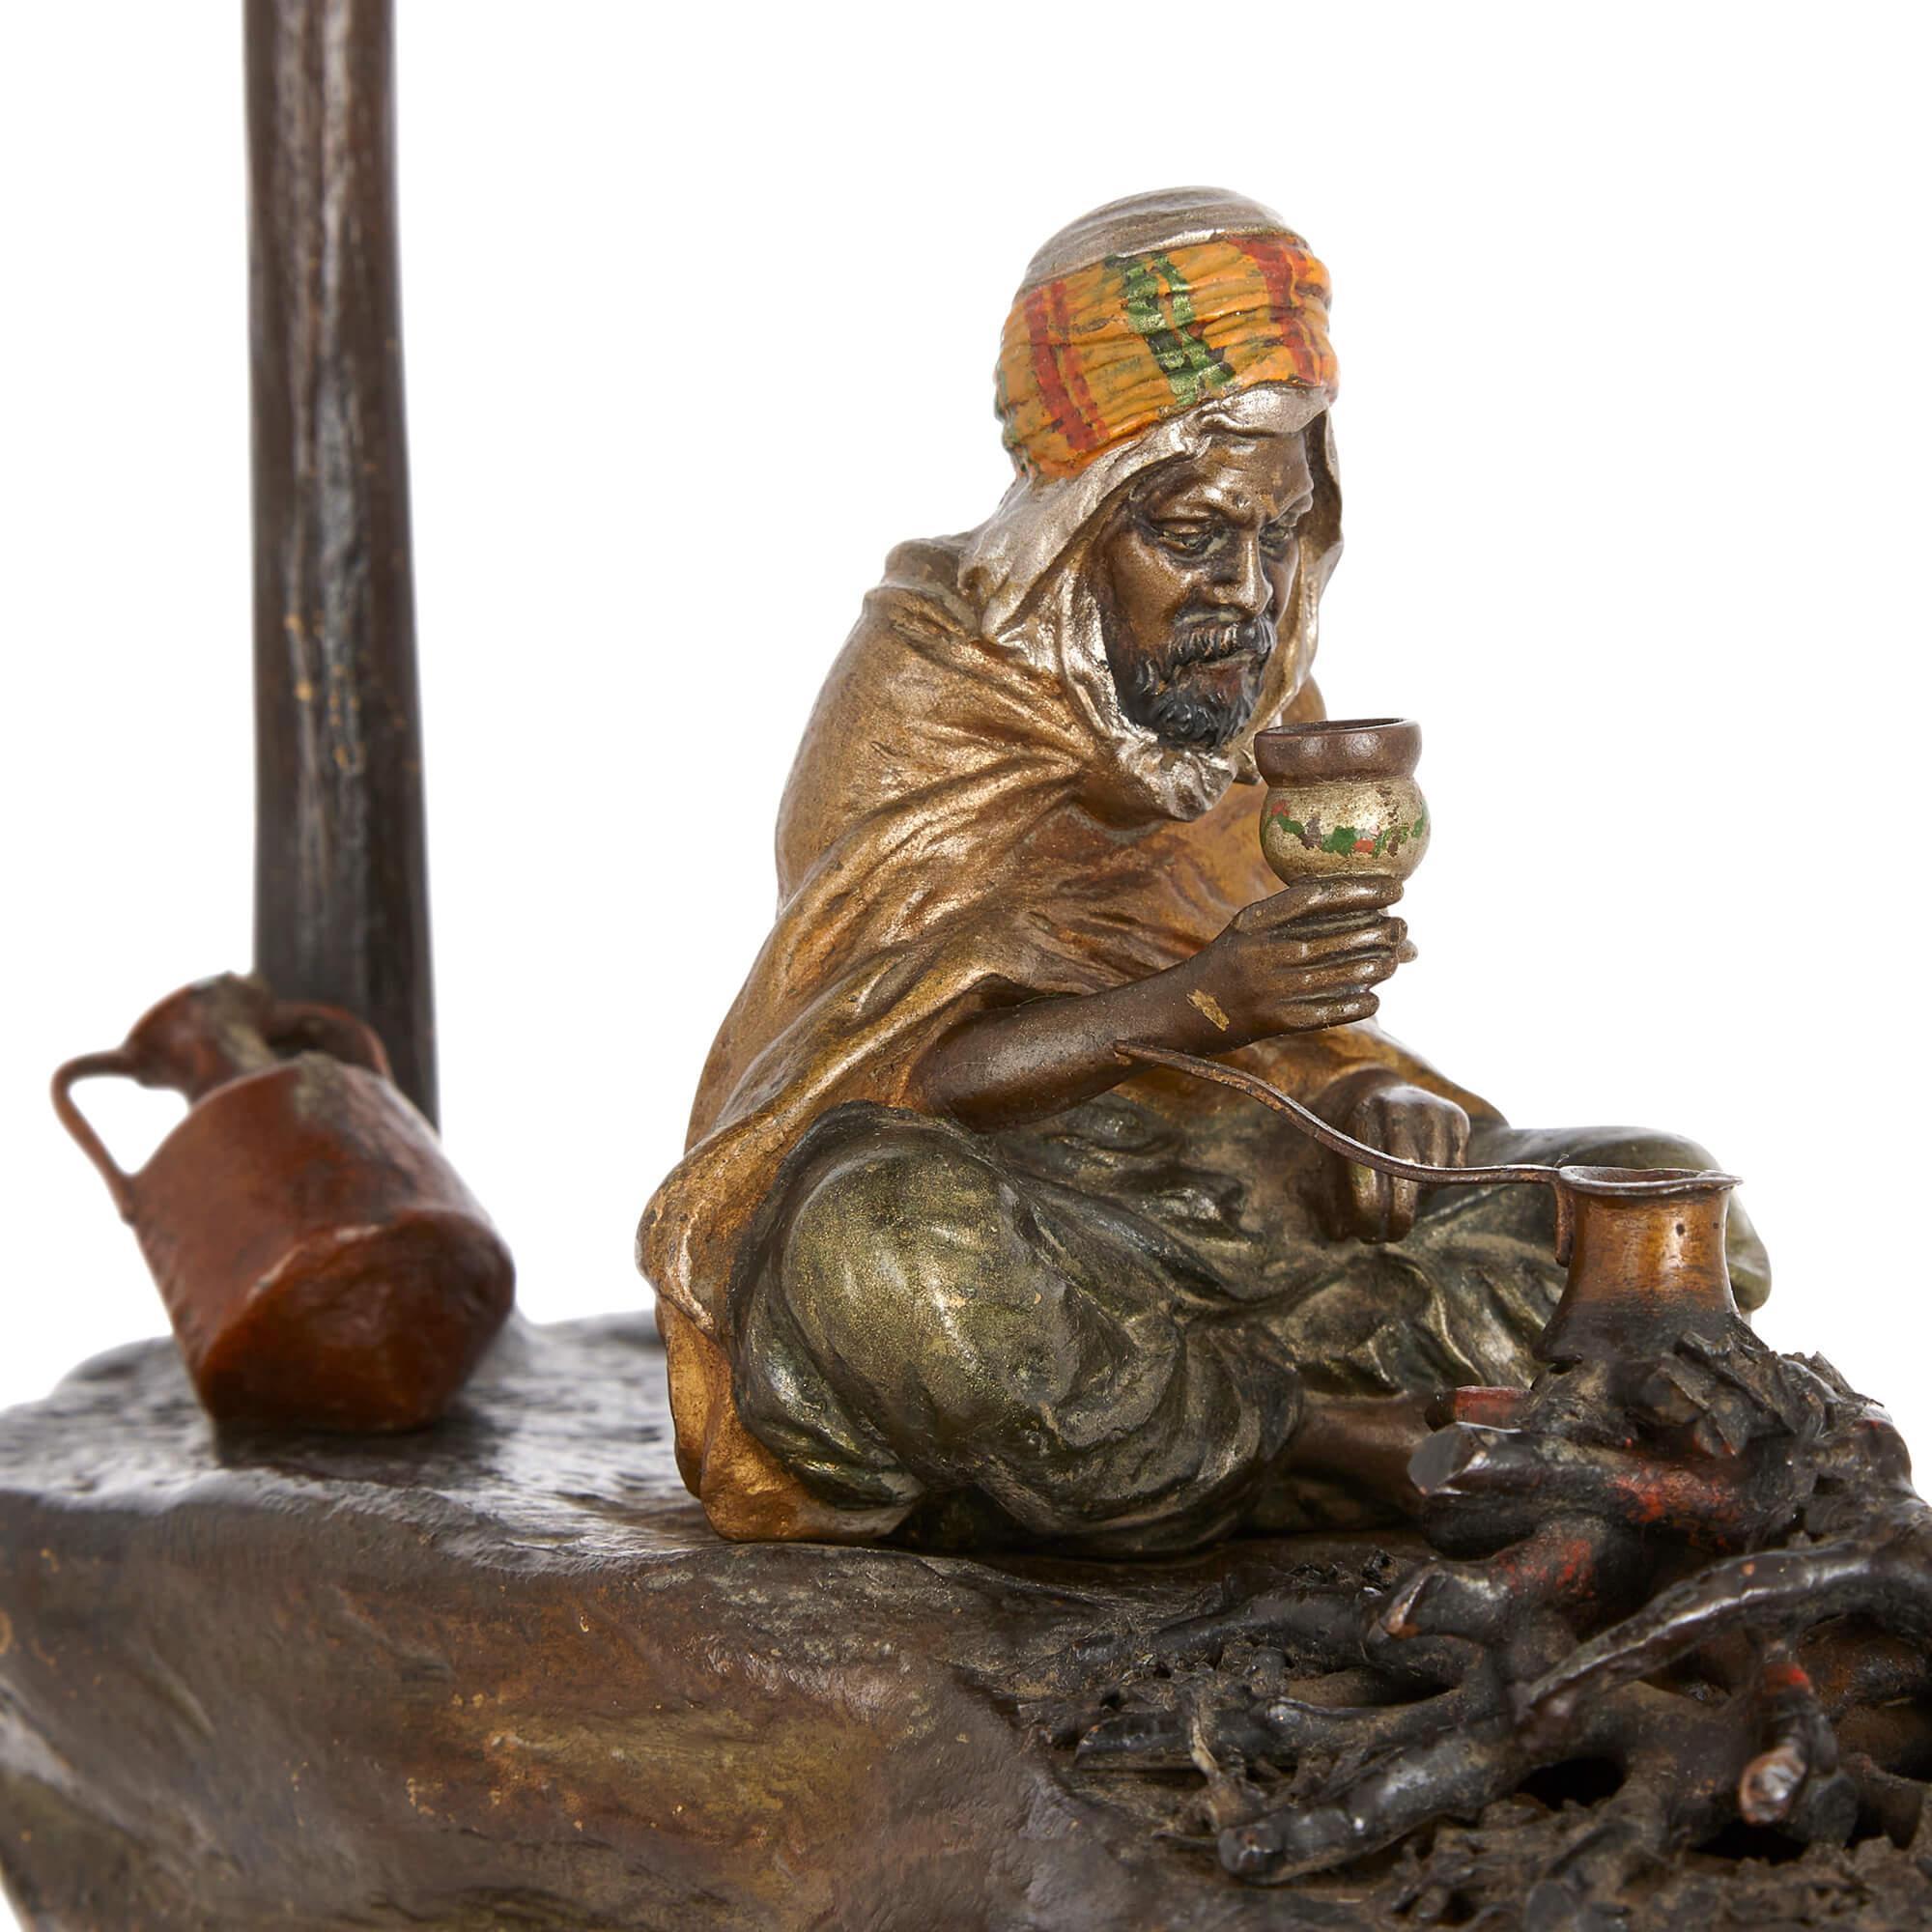 Austrian Viennese Cold-Painted Bronze Lamp of an Arab by a Campfire by Bergman For Sale